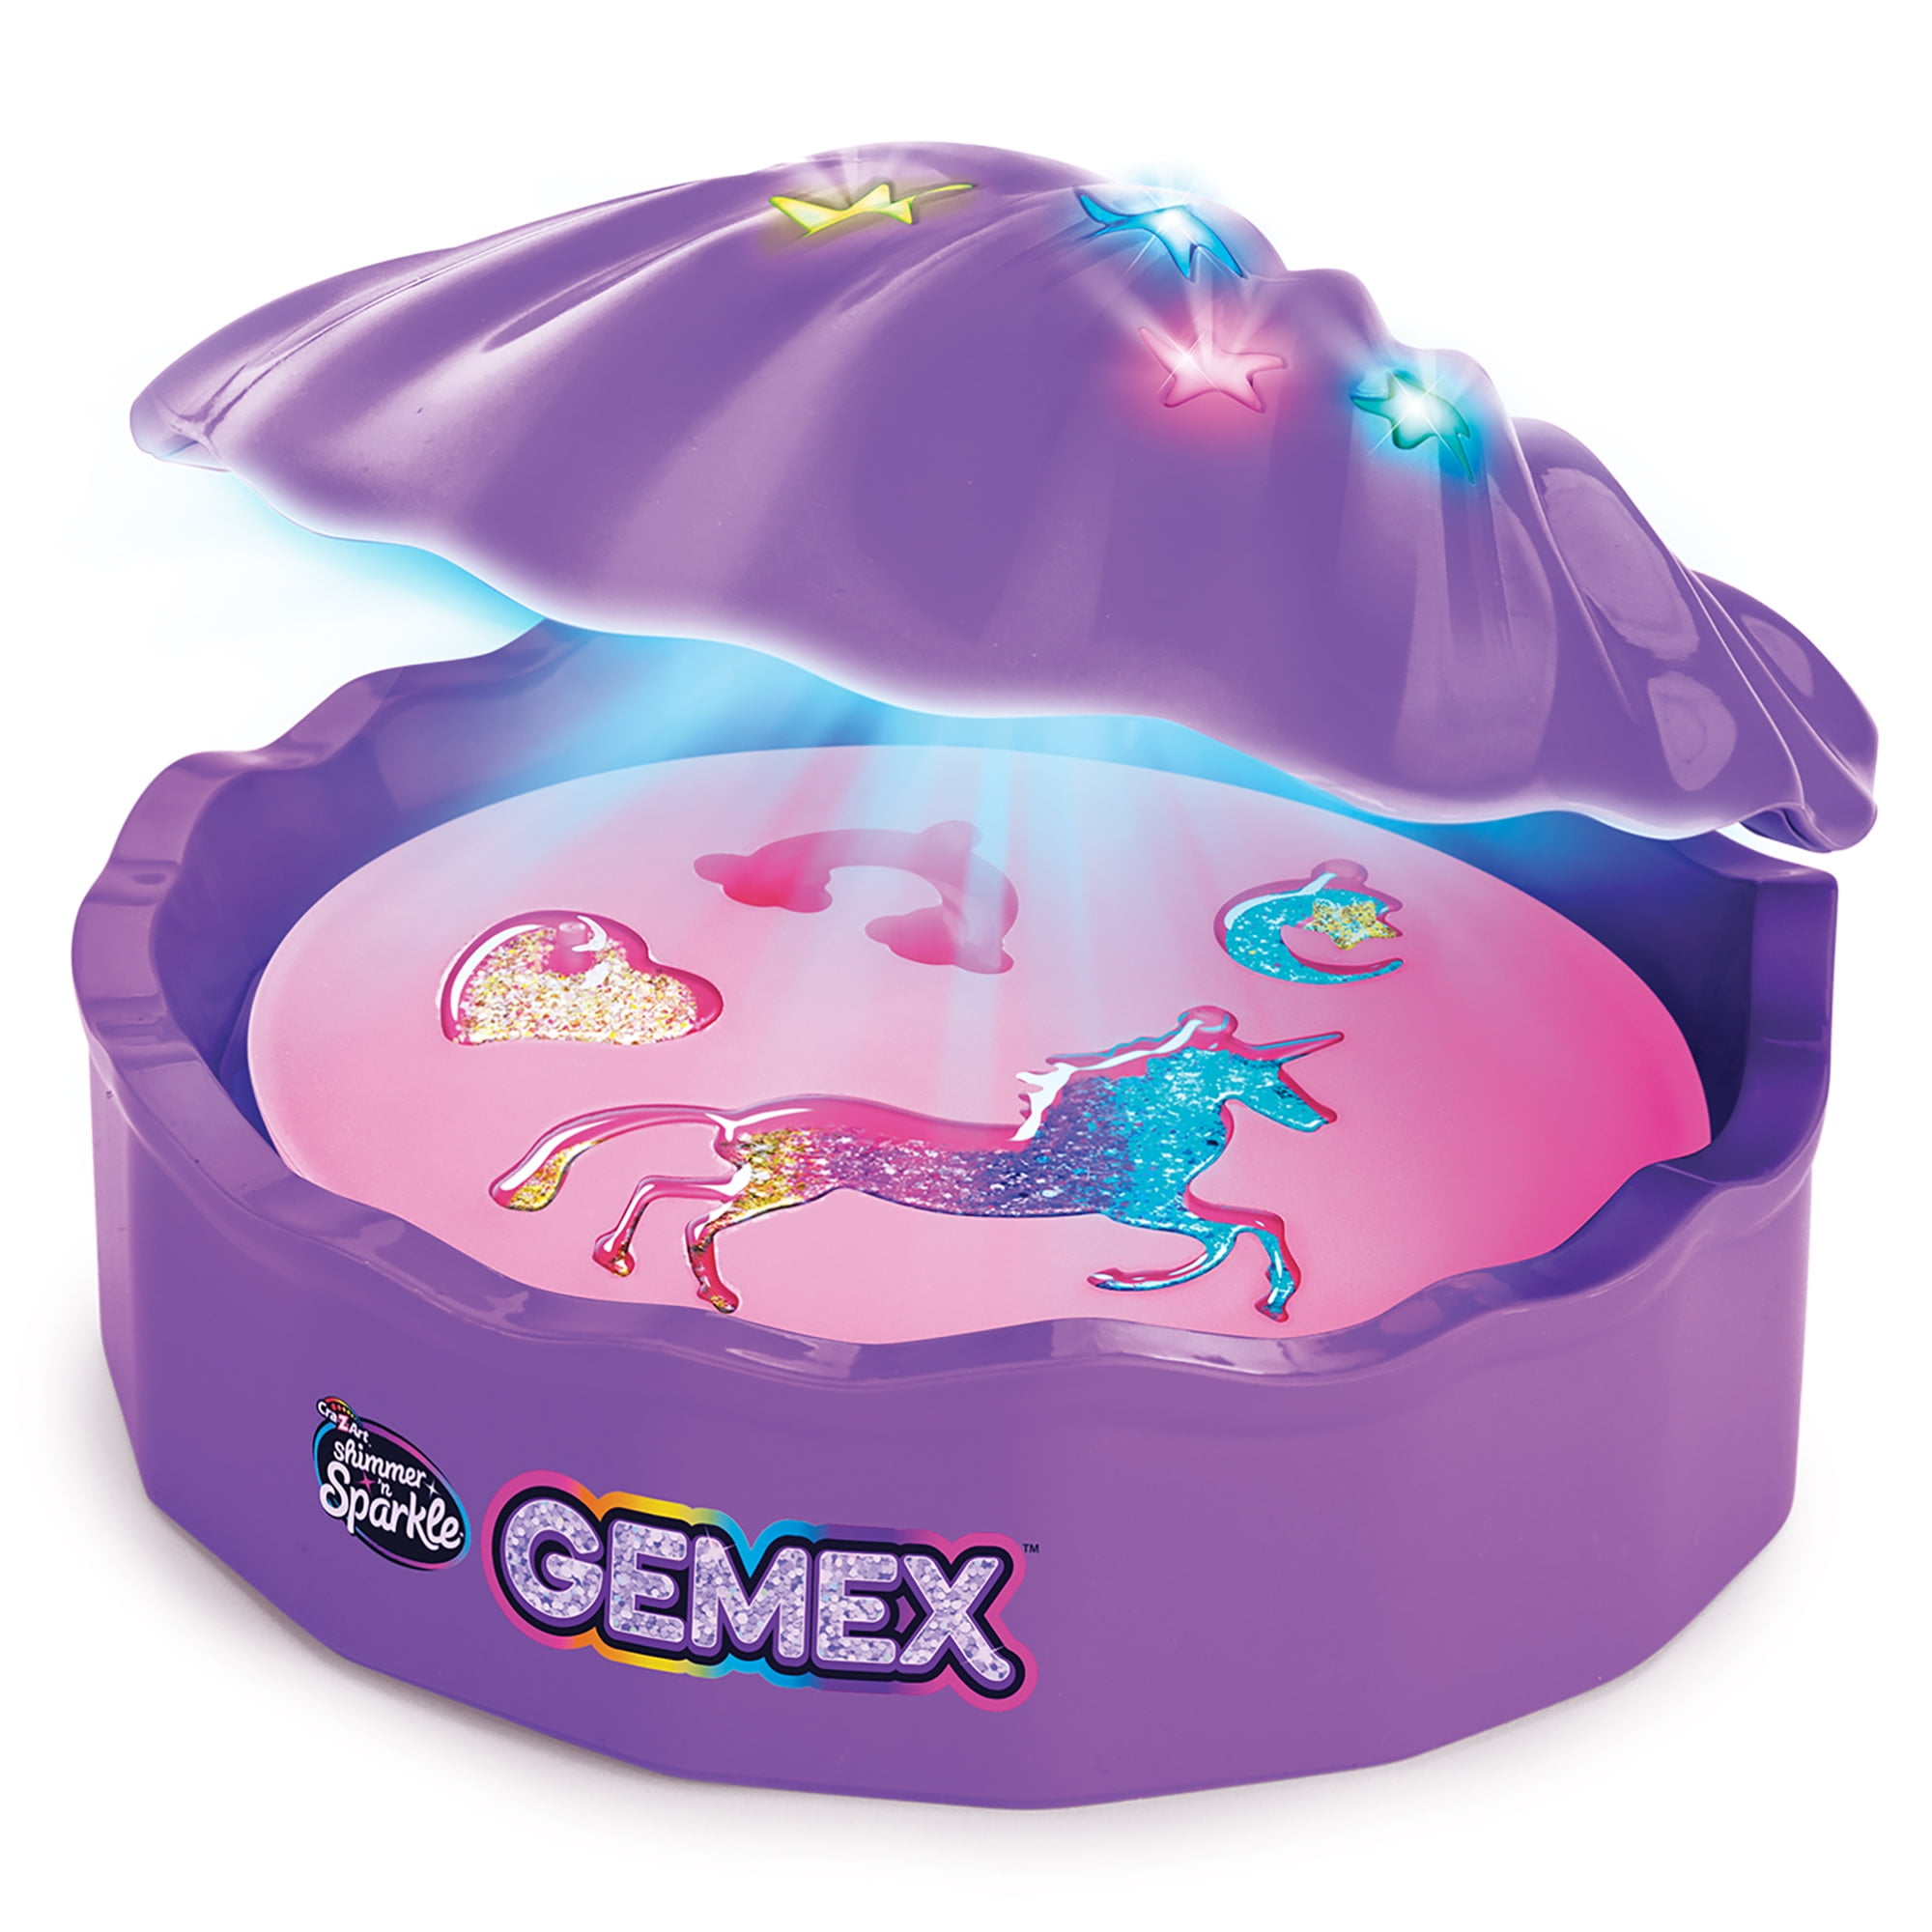 Cra-Z-Art Gemex Crystal Magic Gel Refill for the Gel to Gems Magic Shell,  Ages 8 and up